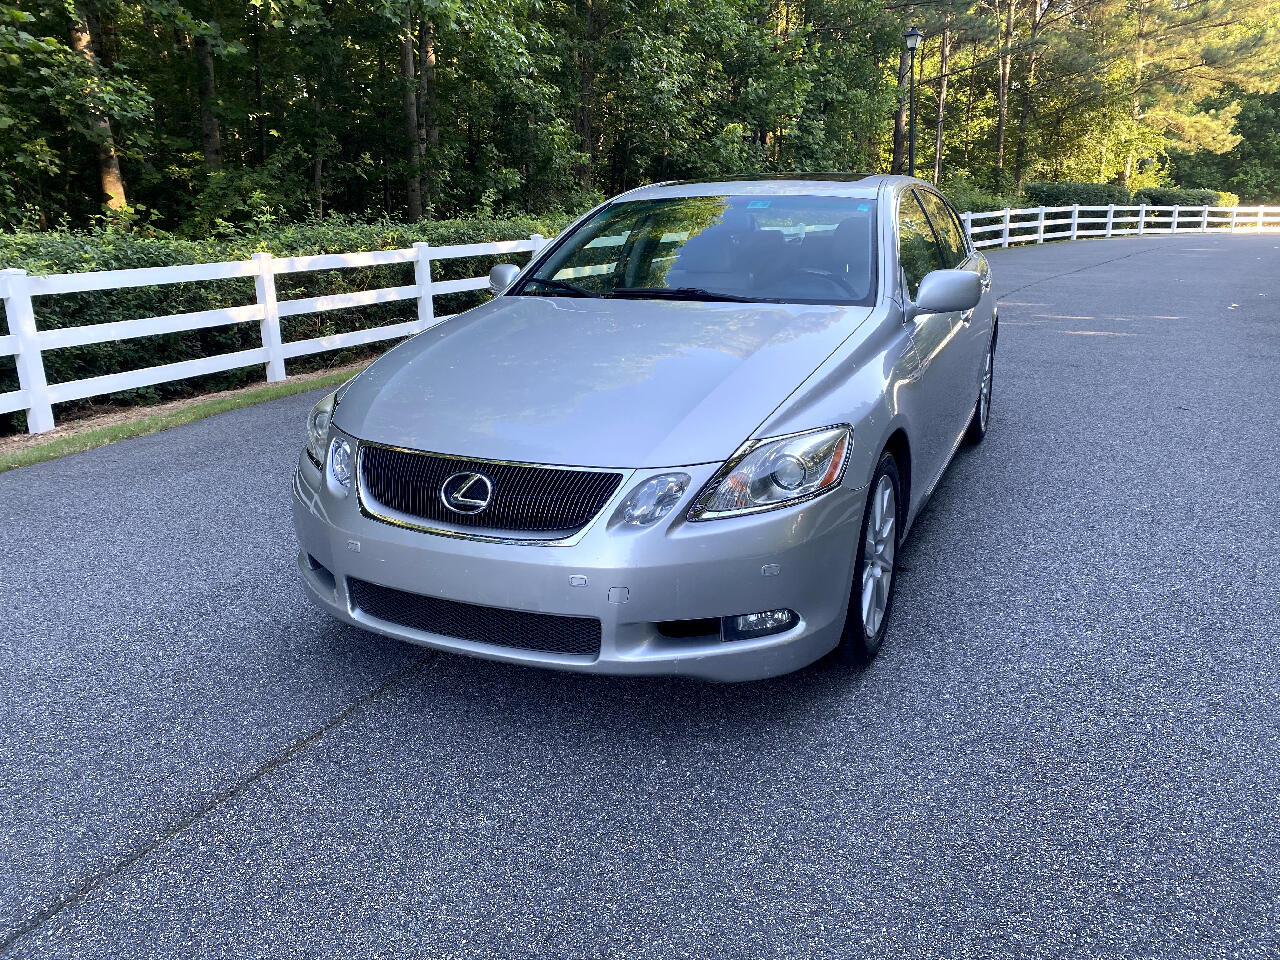 Used 06 Lexus Gs Gs 300 For Sale In Duluth Ga Johnson Automotive Group Inc